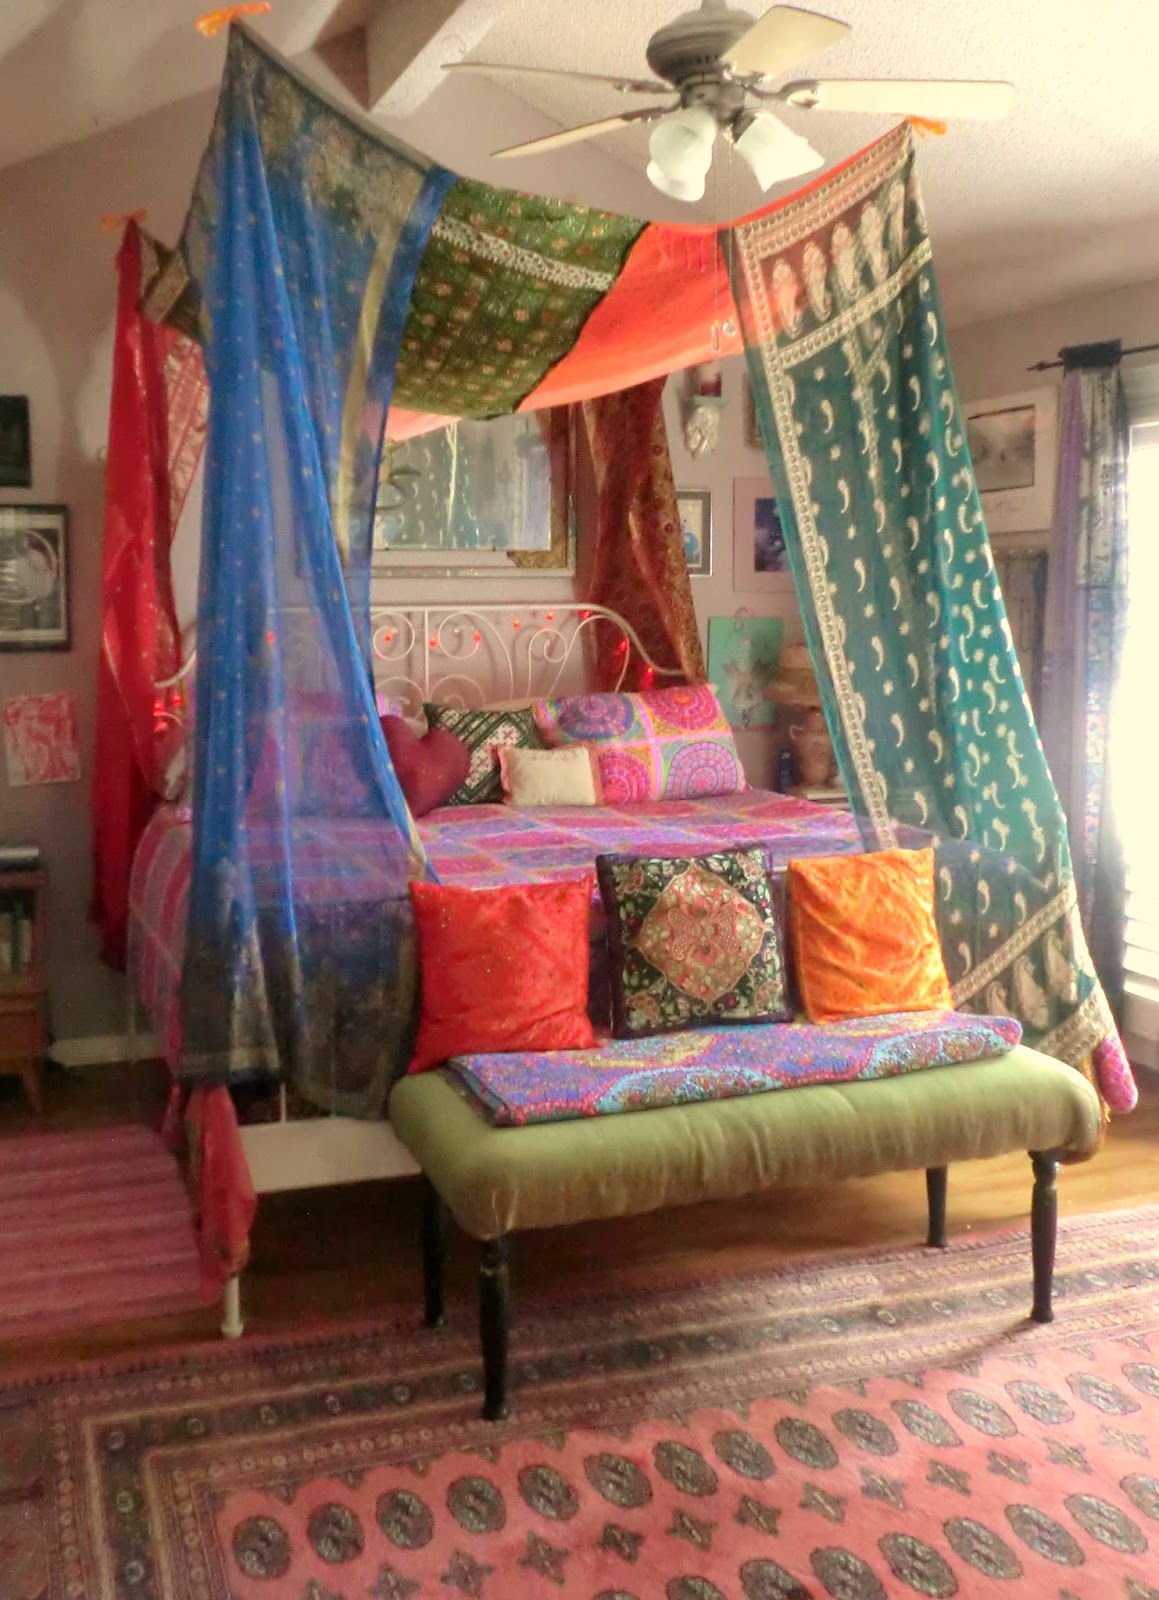 GYPSY YAYA: Babylon Sisters Gypsy Bed Canopies Are Here! AND-